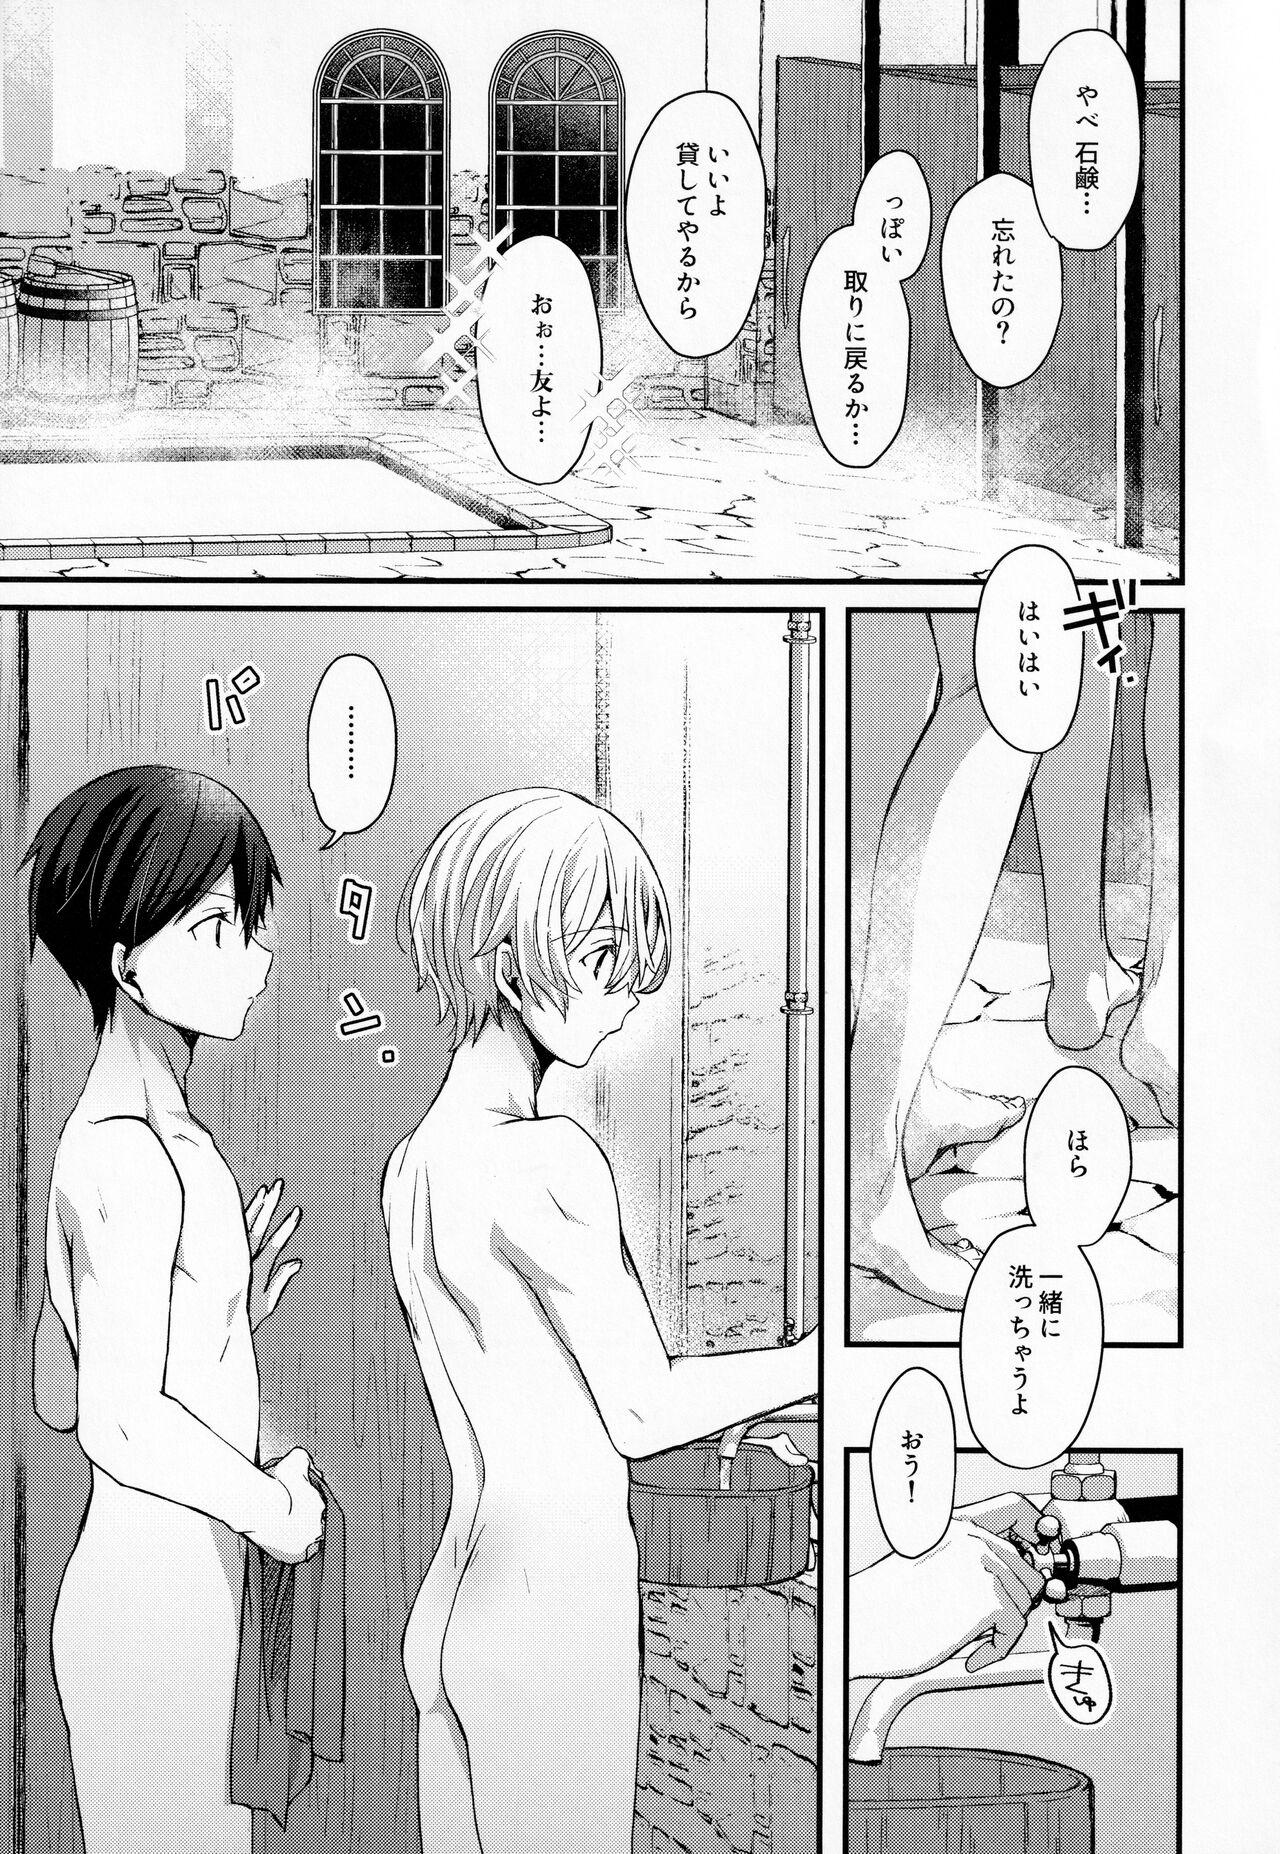 One Gaman Shinaide - Sword art online Orgasms - Page 4